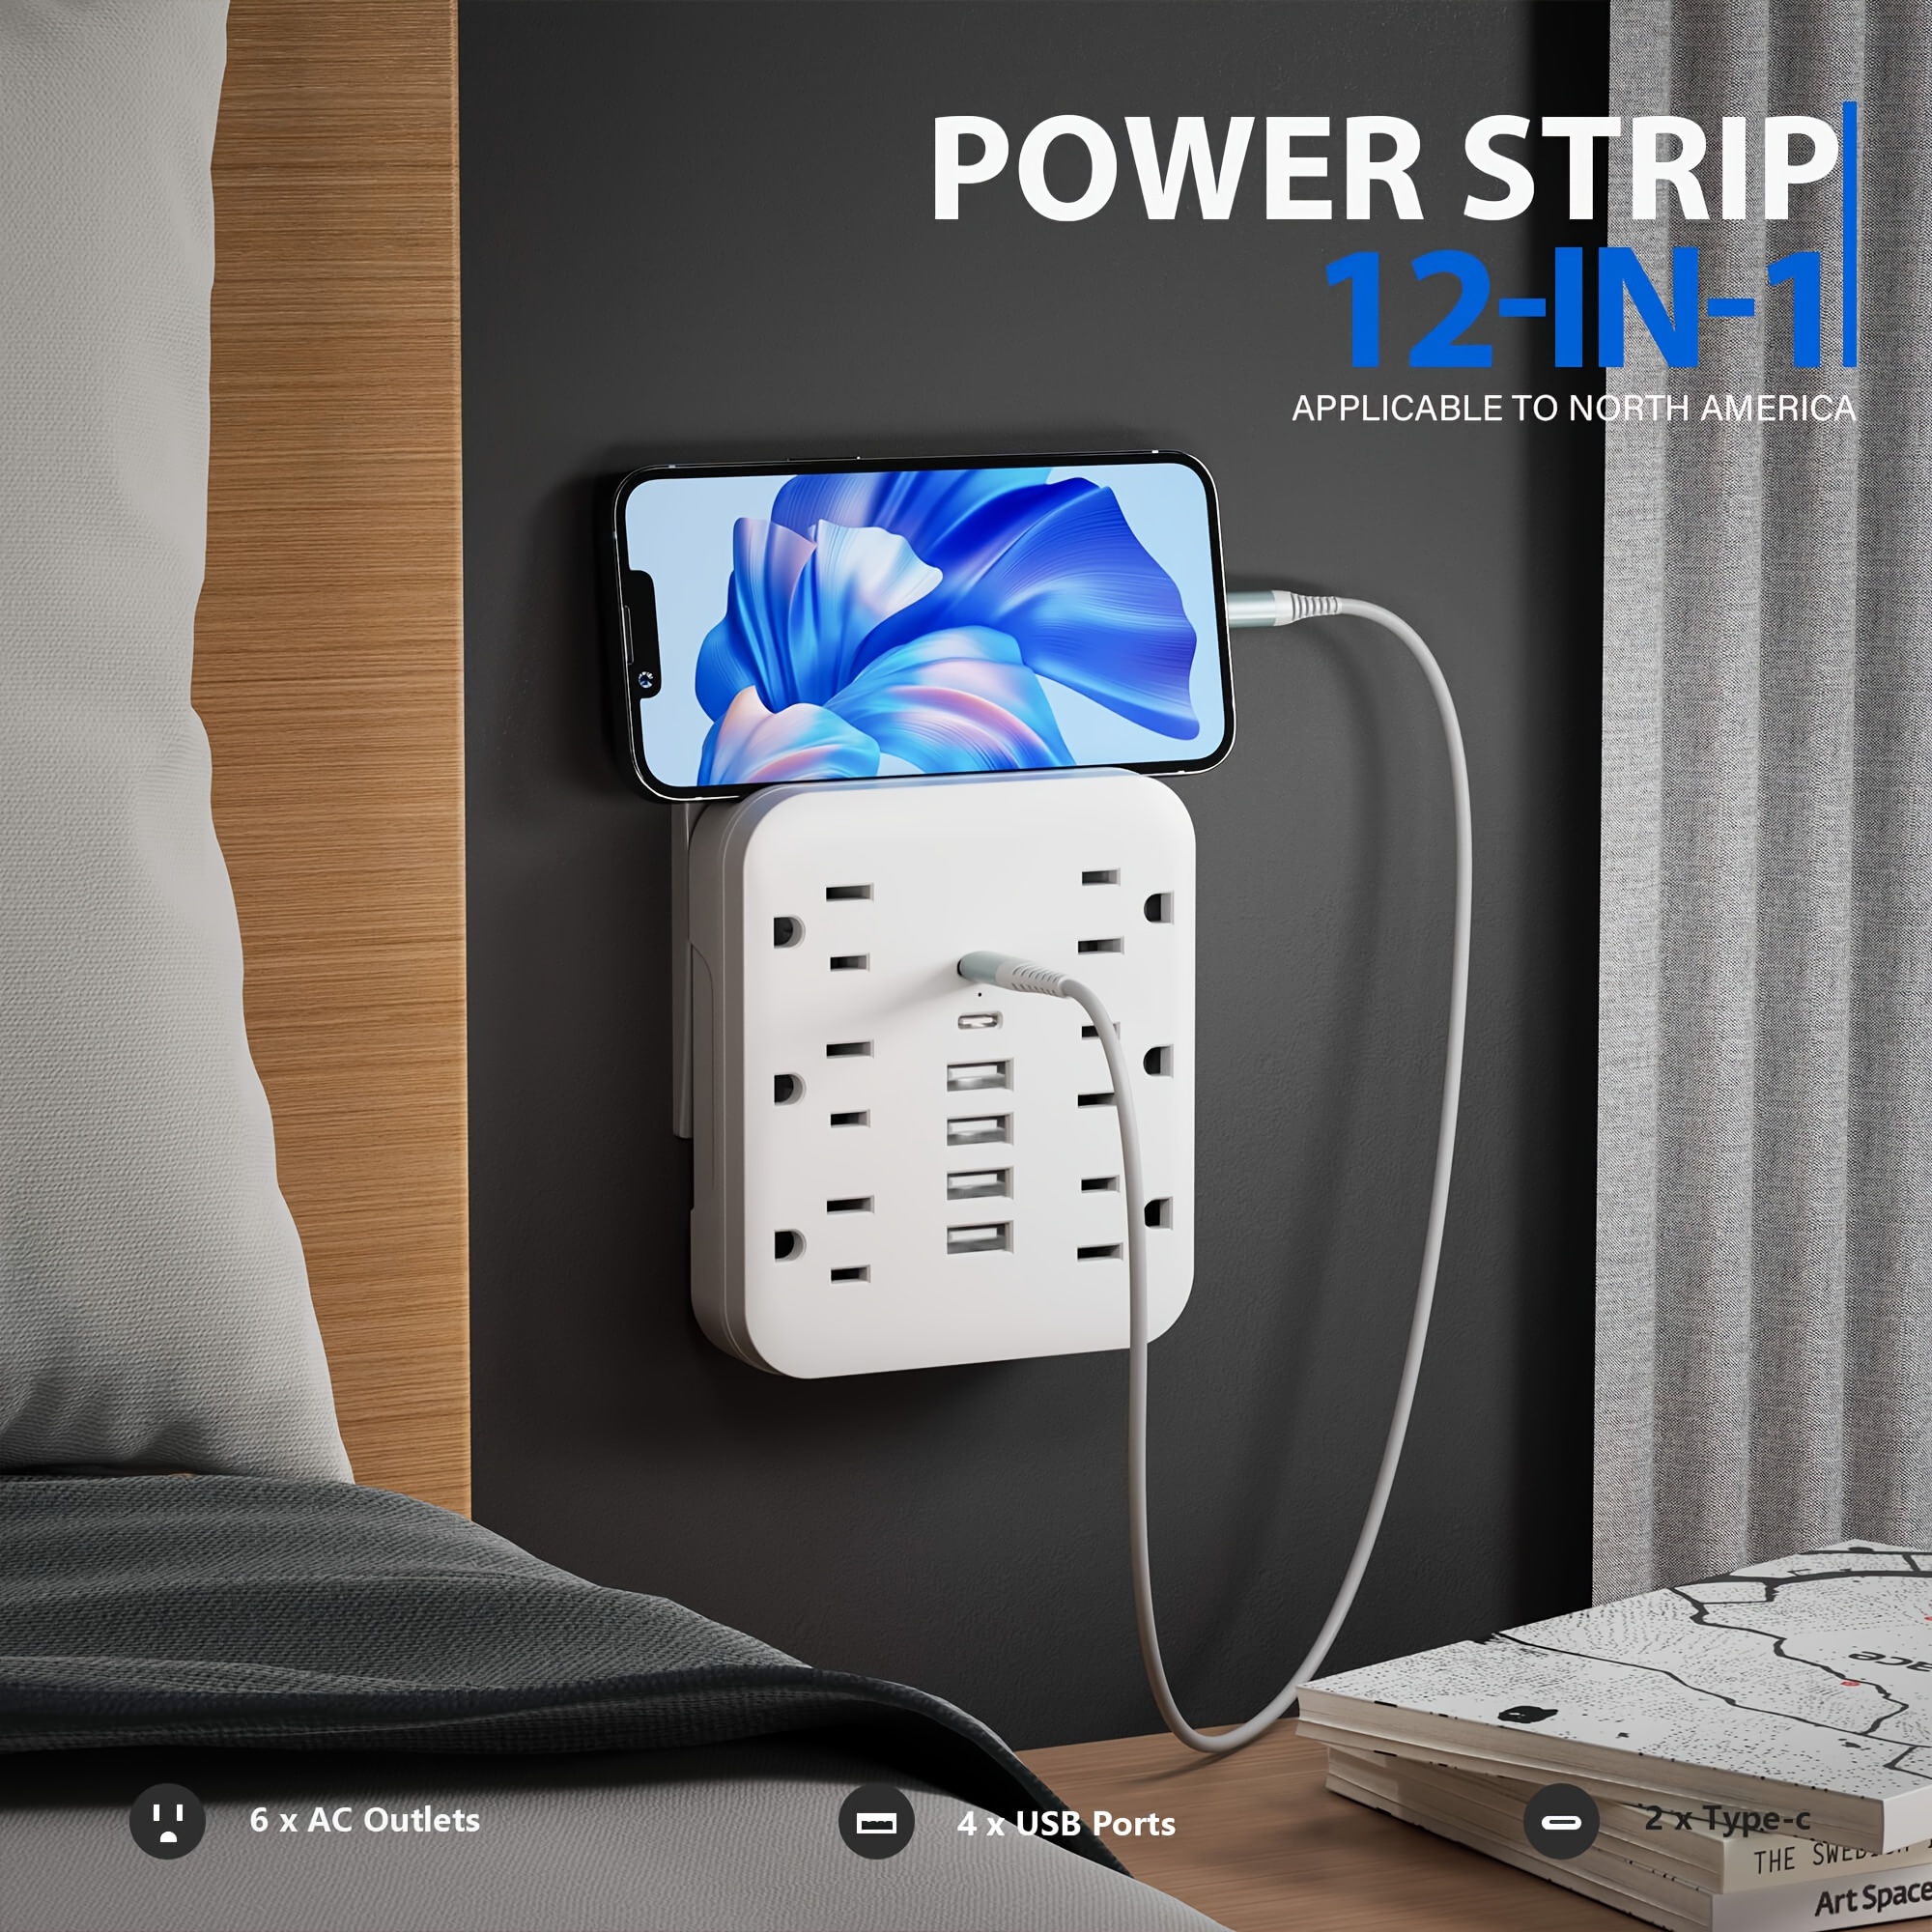 

12-in-1 Multi-plug Receptacle Extender With Usb, Wall Outlet Splitter With 4 Usb Ports (2 Usb Type-c) And 6 Receptacles, Ideal For Home, Office, And Travel